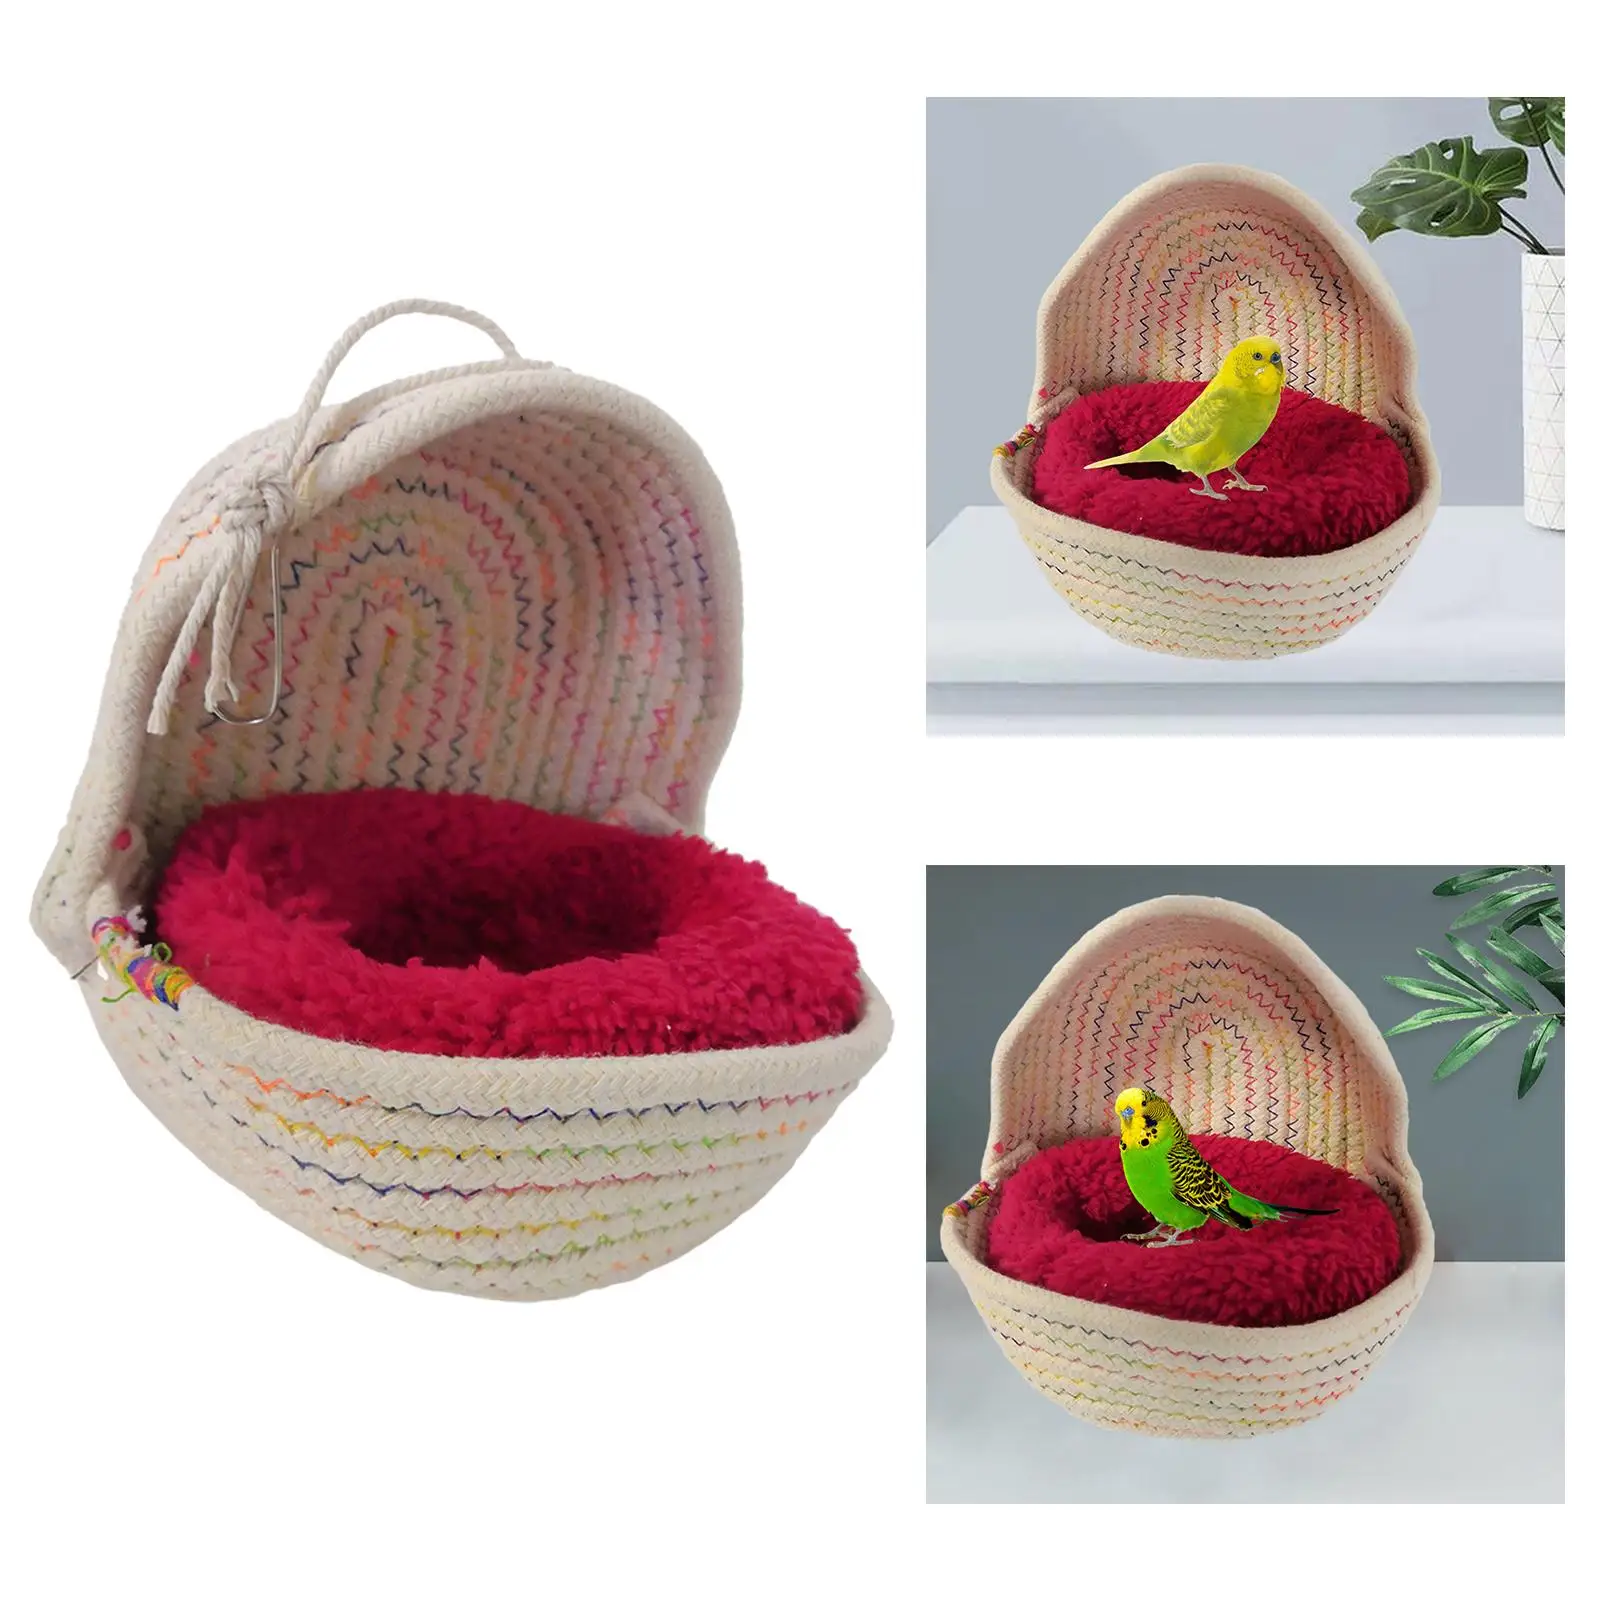 Bird Cotton Nest Cage Hanging Sleep Bed Hut Toys Snuggle Warme Sleeping Bed Tent for Hamster Parrot Cockatiels Cockatoo Lovebird